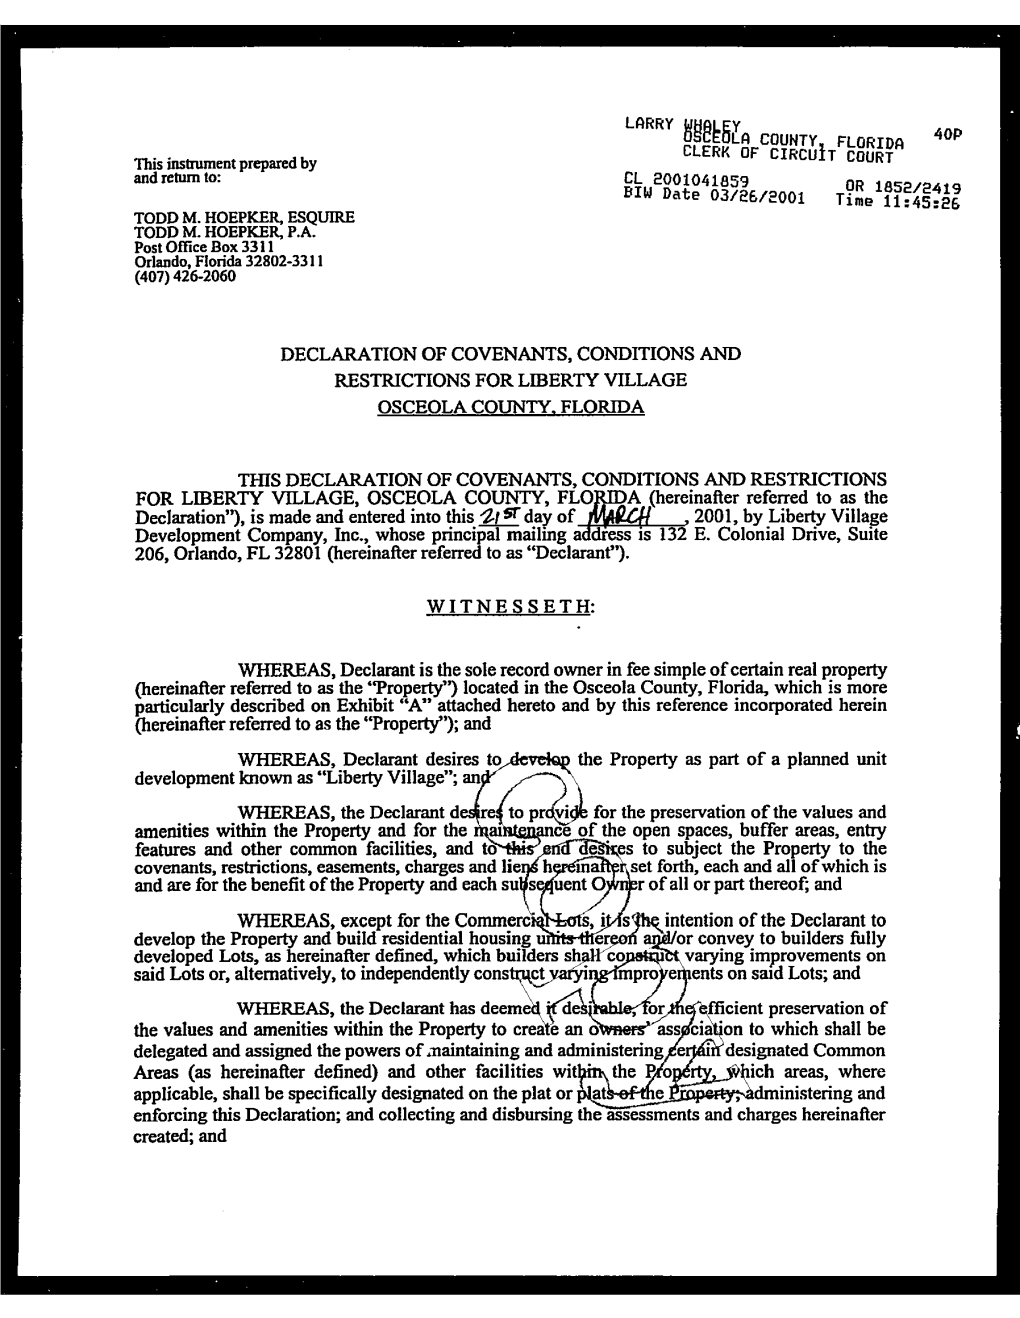 DECLARATION of COVENANTS, CONDITIONS and RESTRICTIONS for Lffierty VILLAGE OSCEOLA COUNTY FLORIDA